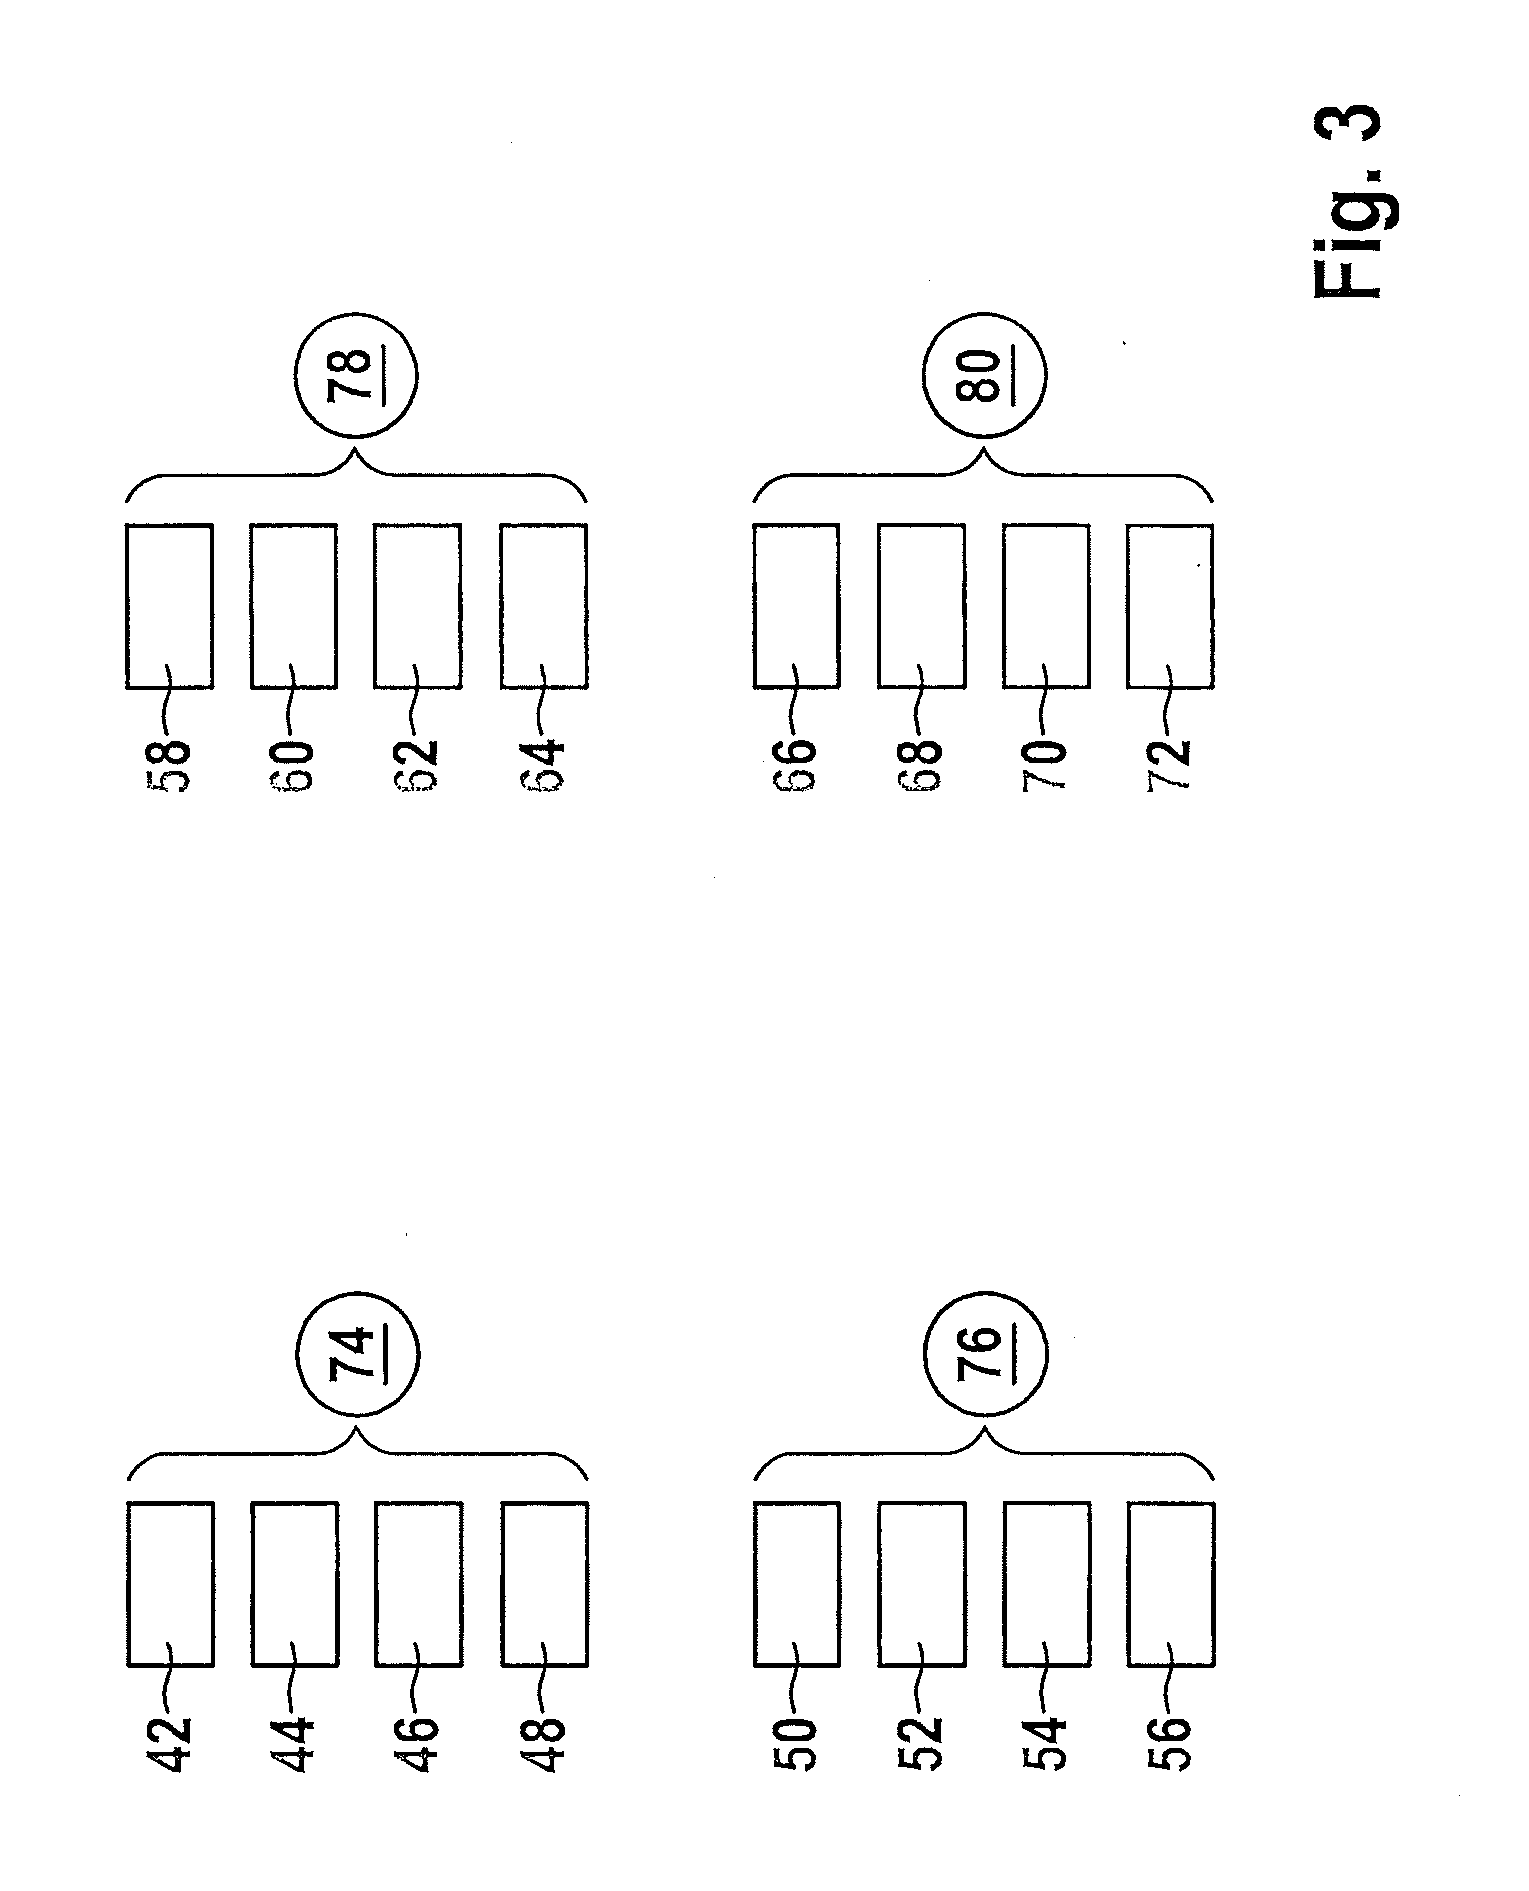 Method for operating a bus system